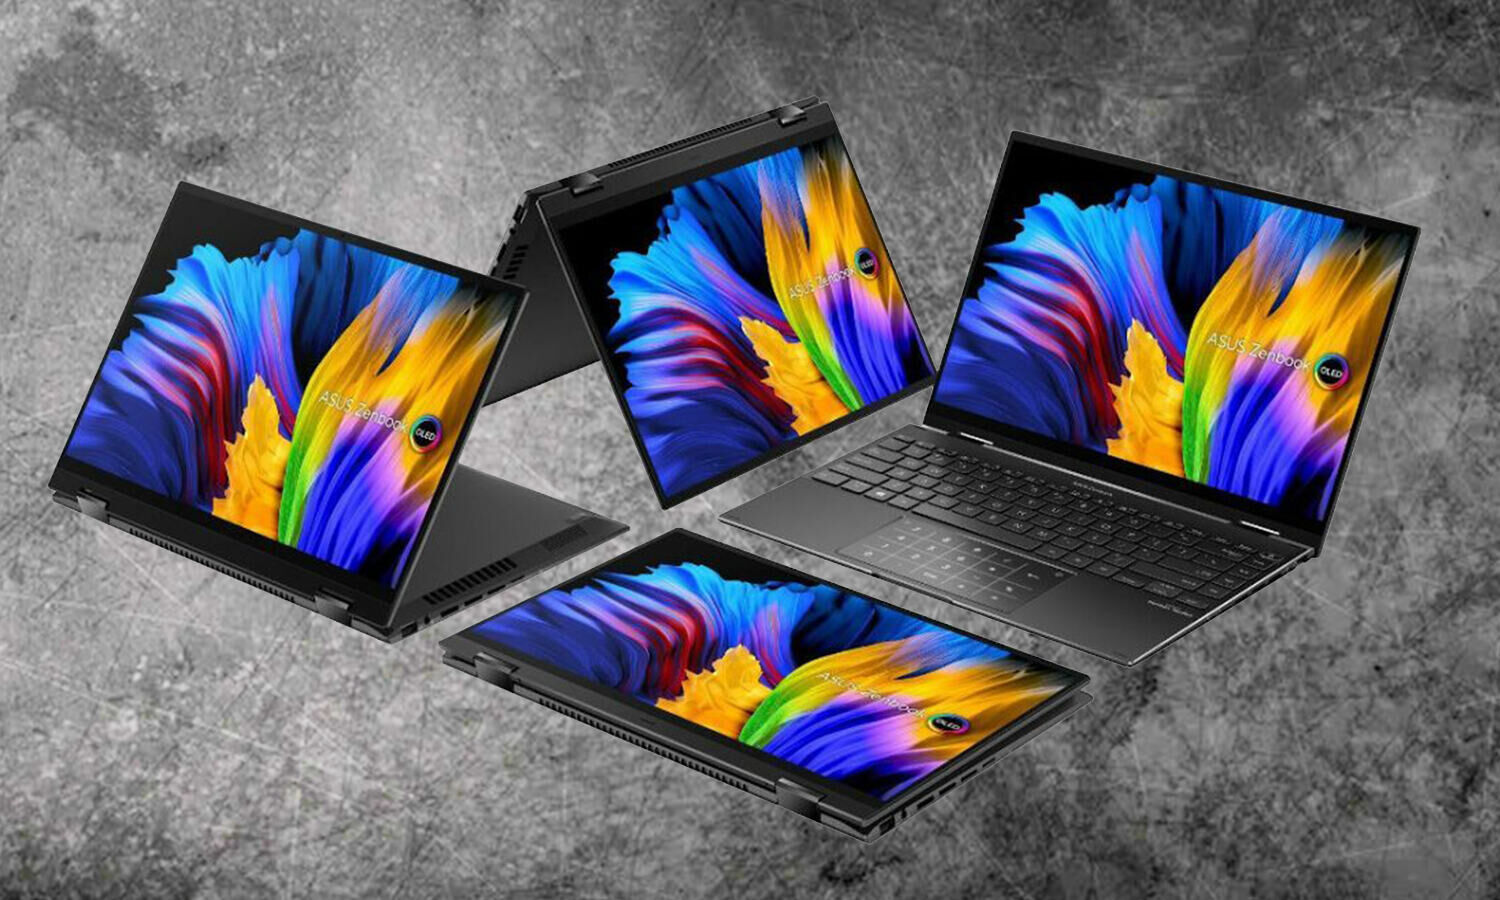 ASUS Vivobook S14 Flip, Zenbook 14 Flip OLED and Vivobook 15 (Touch) laptops launched in India, know features